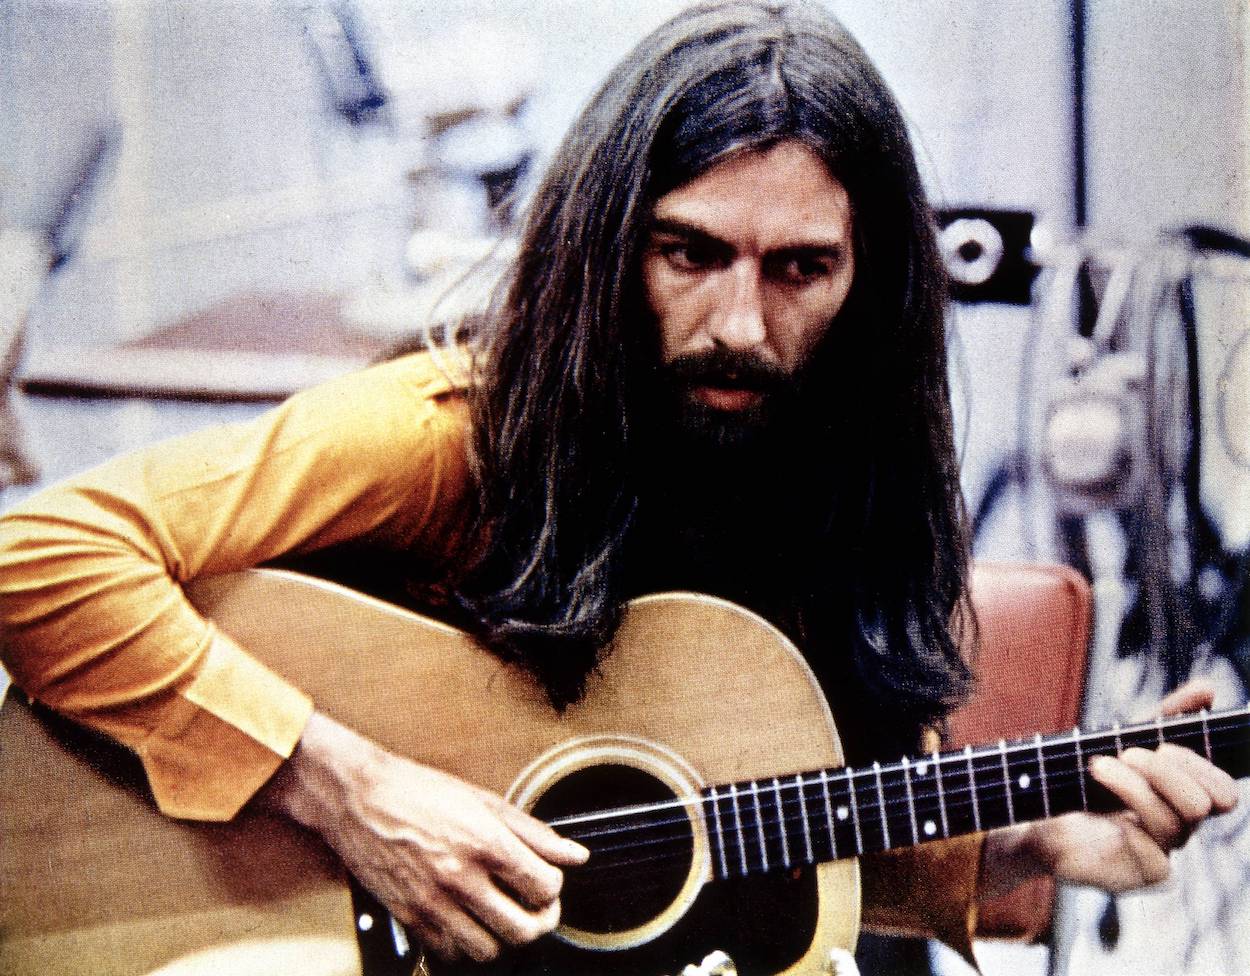 George Harrison playing guitar circa 1970/1971 when his solo album 'All Things Must Pass' came out. Harrison recorded his first solo album before The Beatles broke up and he found solo success with 'All Things Must Pass.'